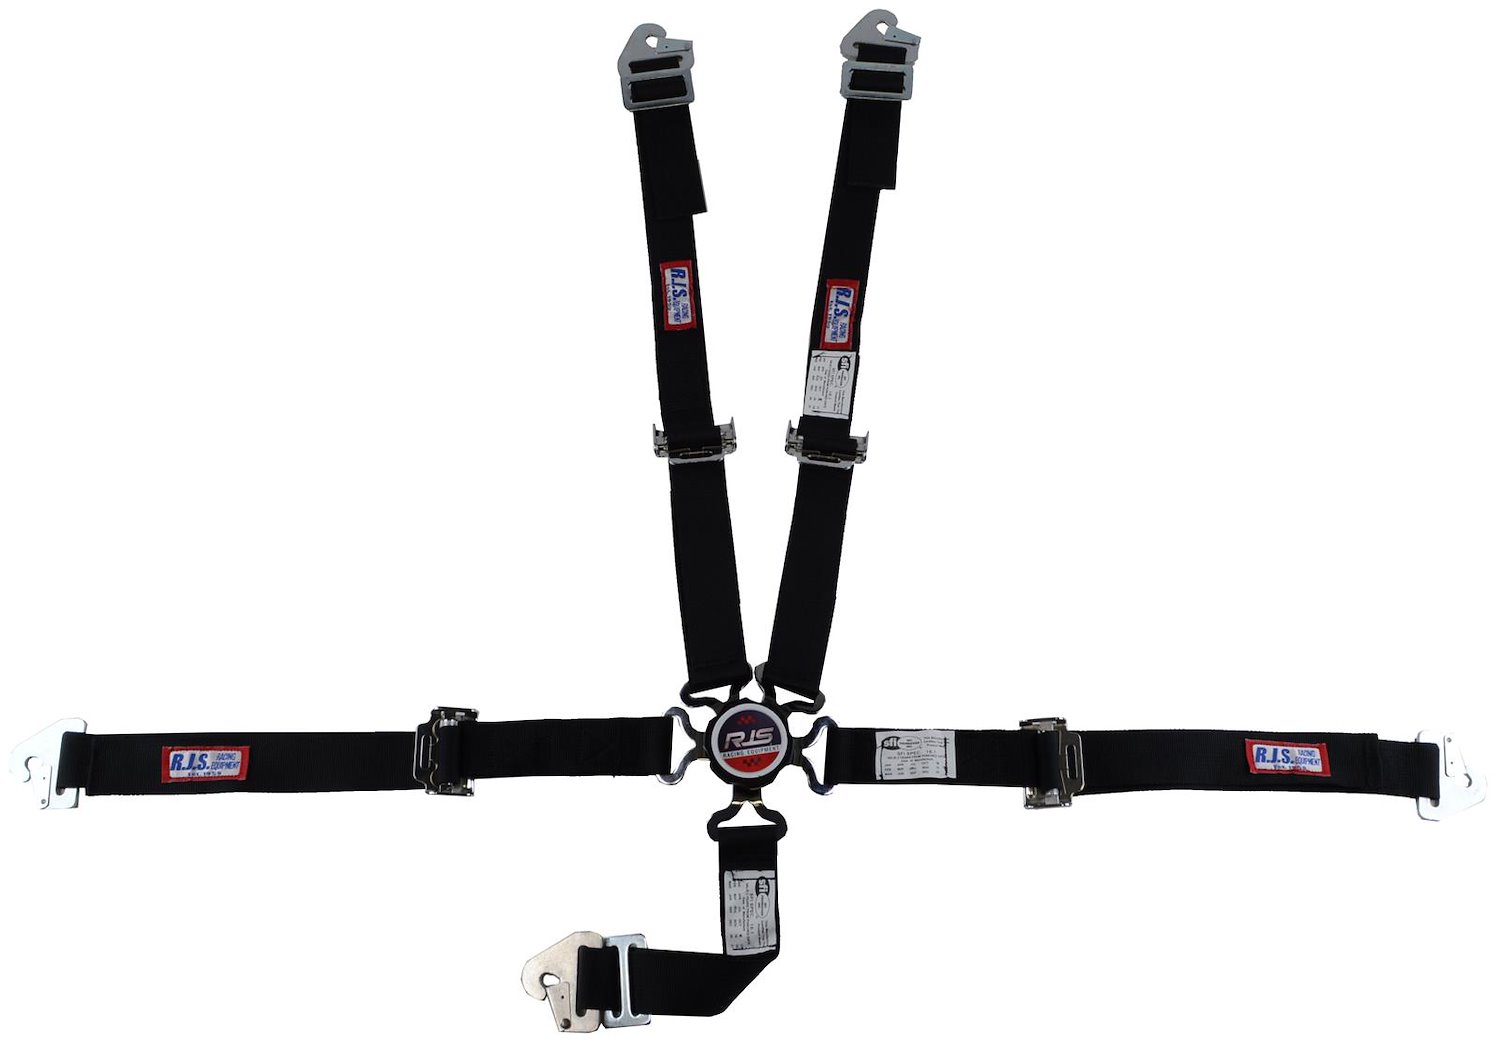 SFI 16.1 CAM-LOCK HARNESS 2 PULL UP Lap Belt 2 Shoulder Harness V ROLL BAR Mount 2 DOUBLE Sub ALL SNAP ENDS w/STERNUM STRAP RED